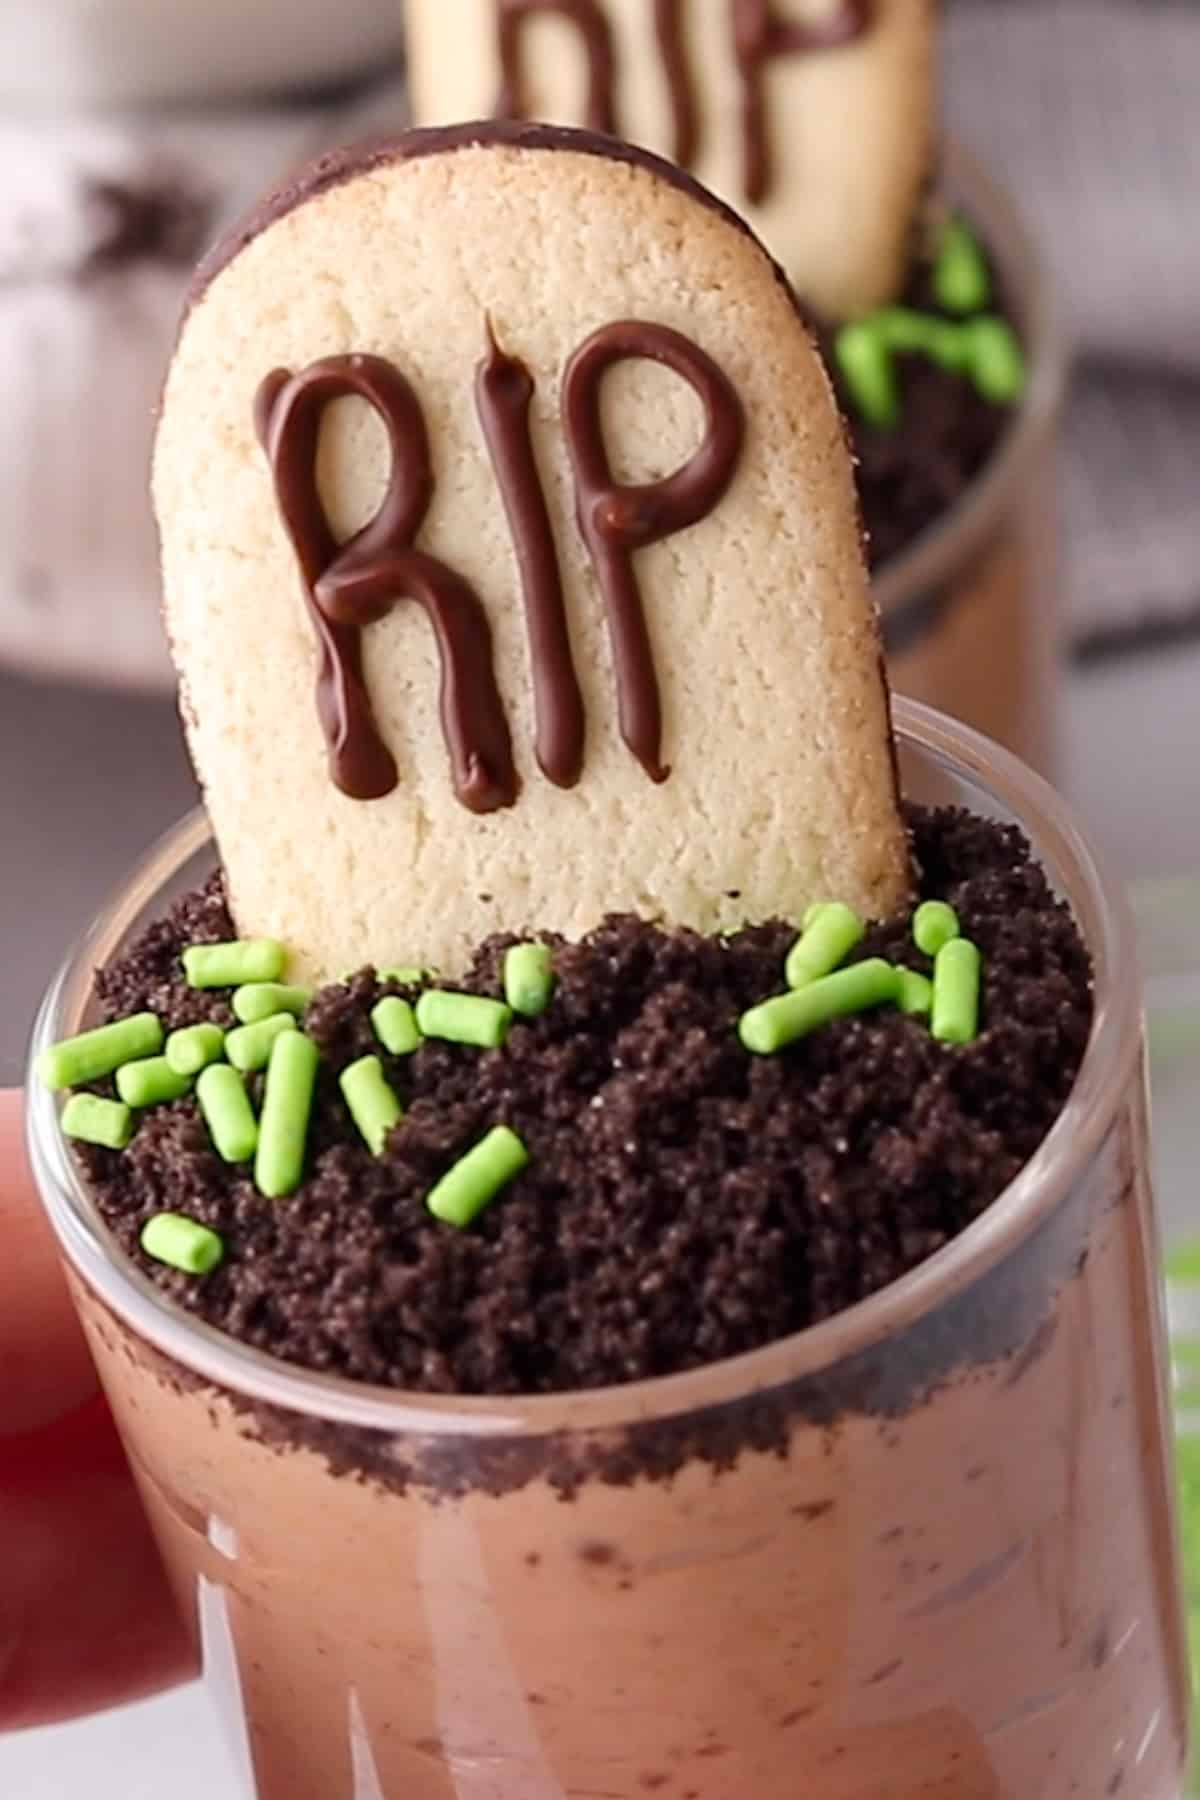 Chocolate Mousse cups decorated for halloween with tombstone